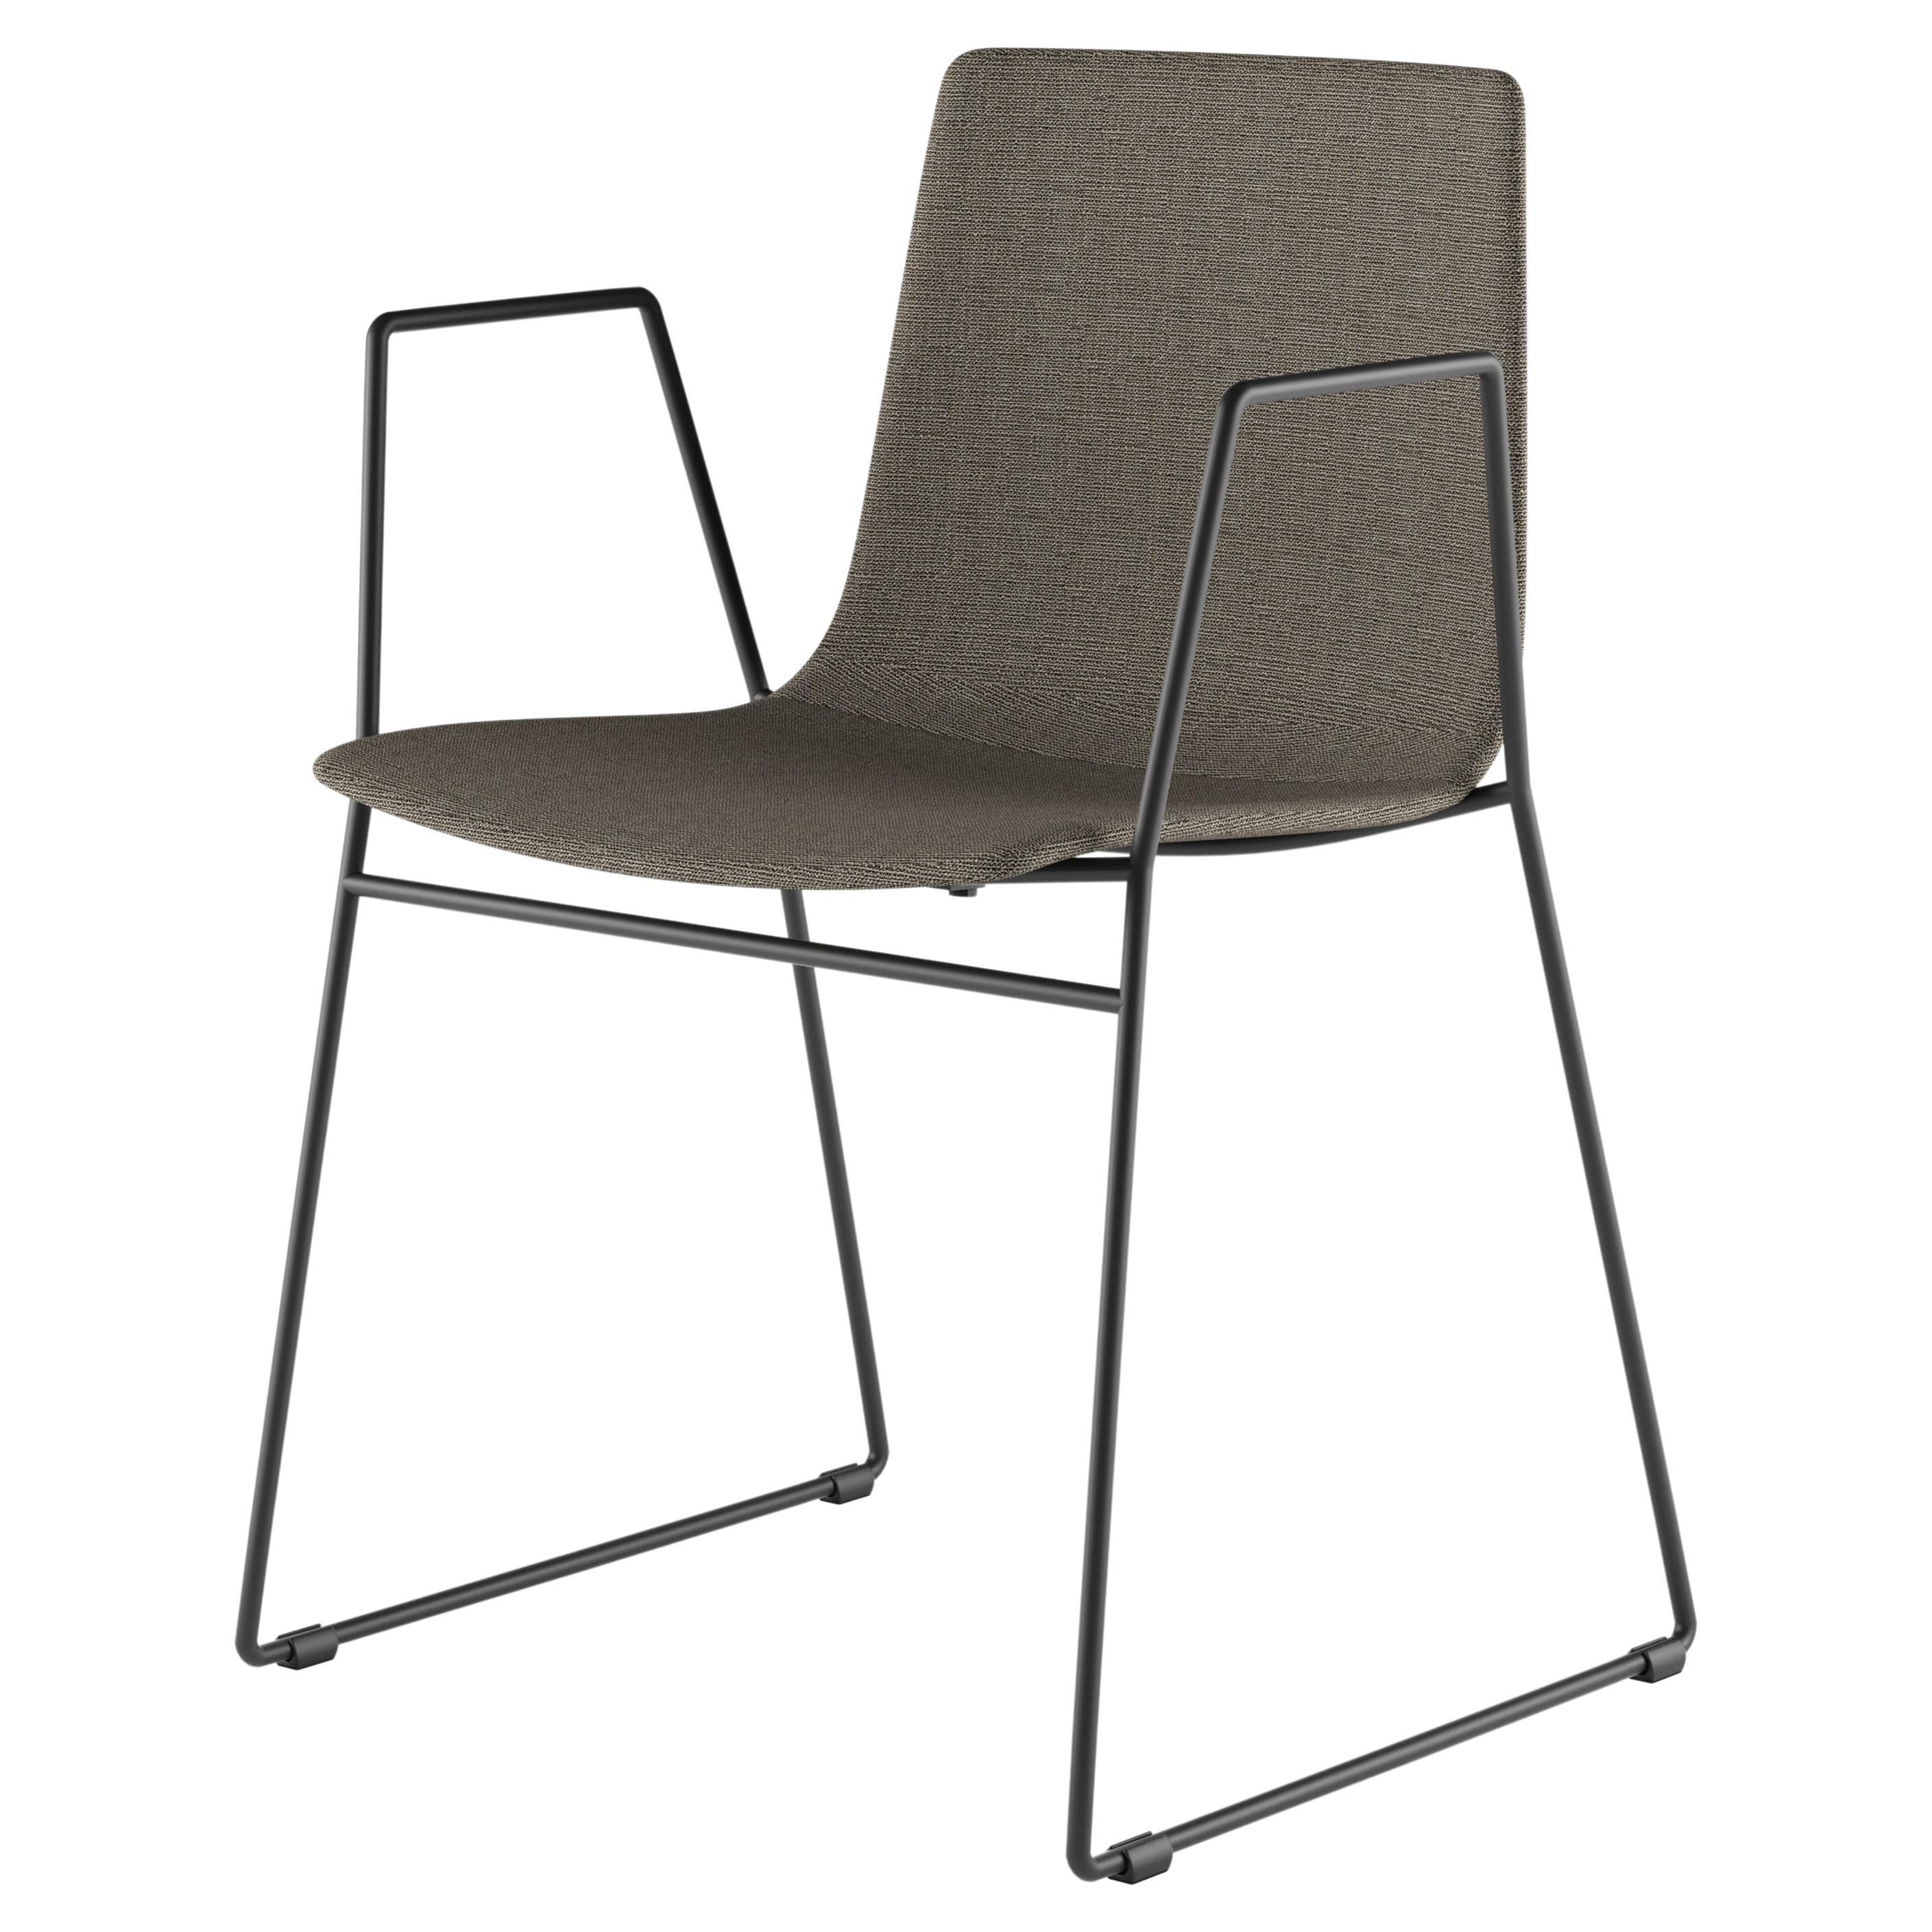 Alias 89L Slim Chair Sledge Arm Soft L in Brown with Black Lacquered Steel Frame For Sale